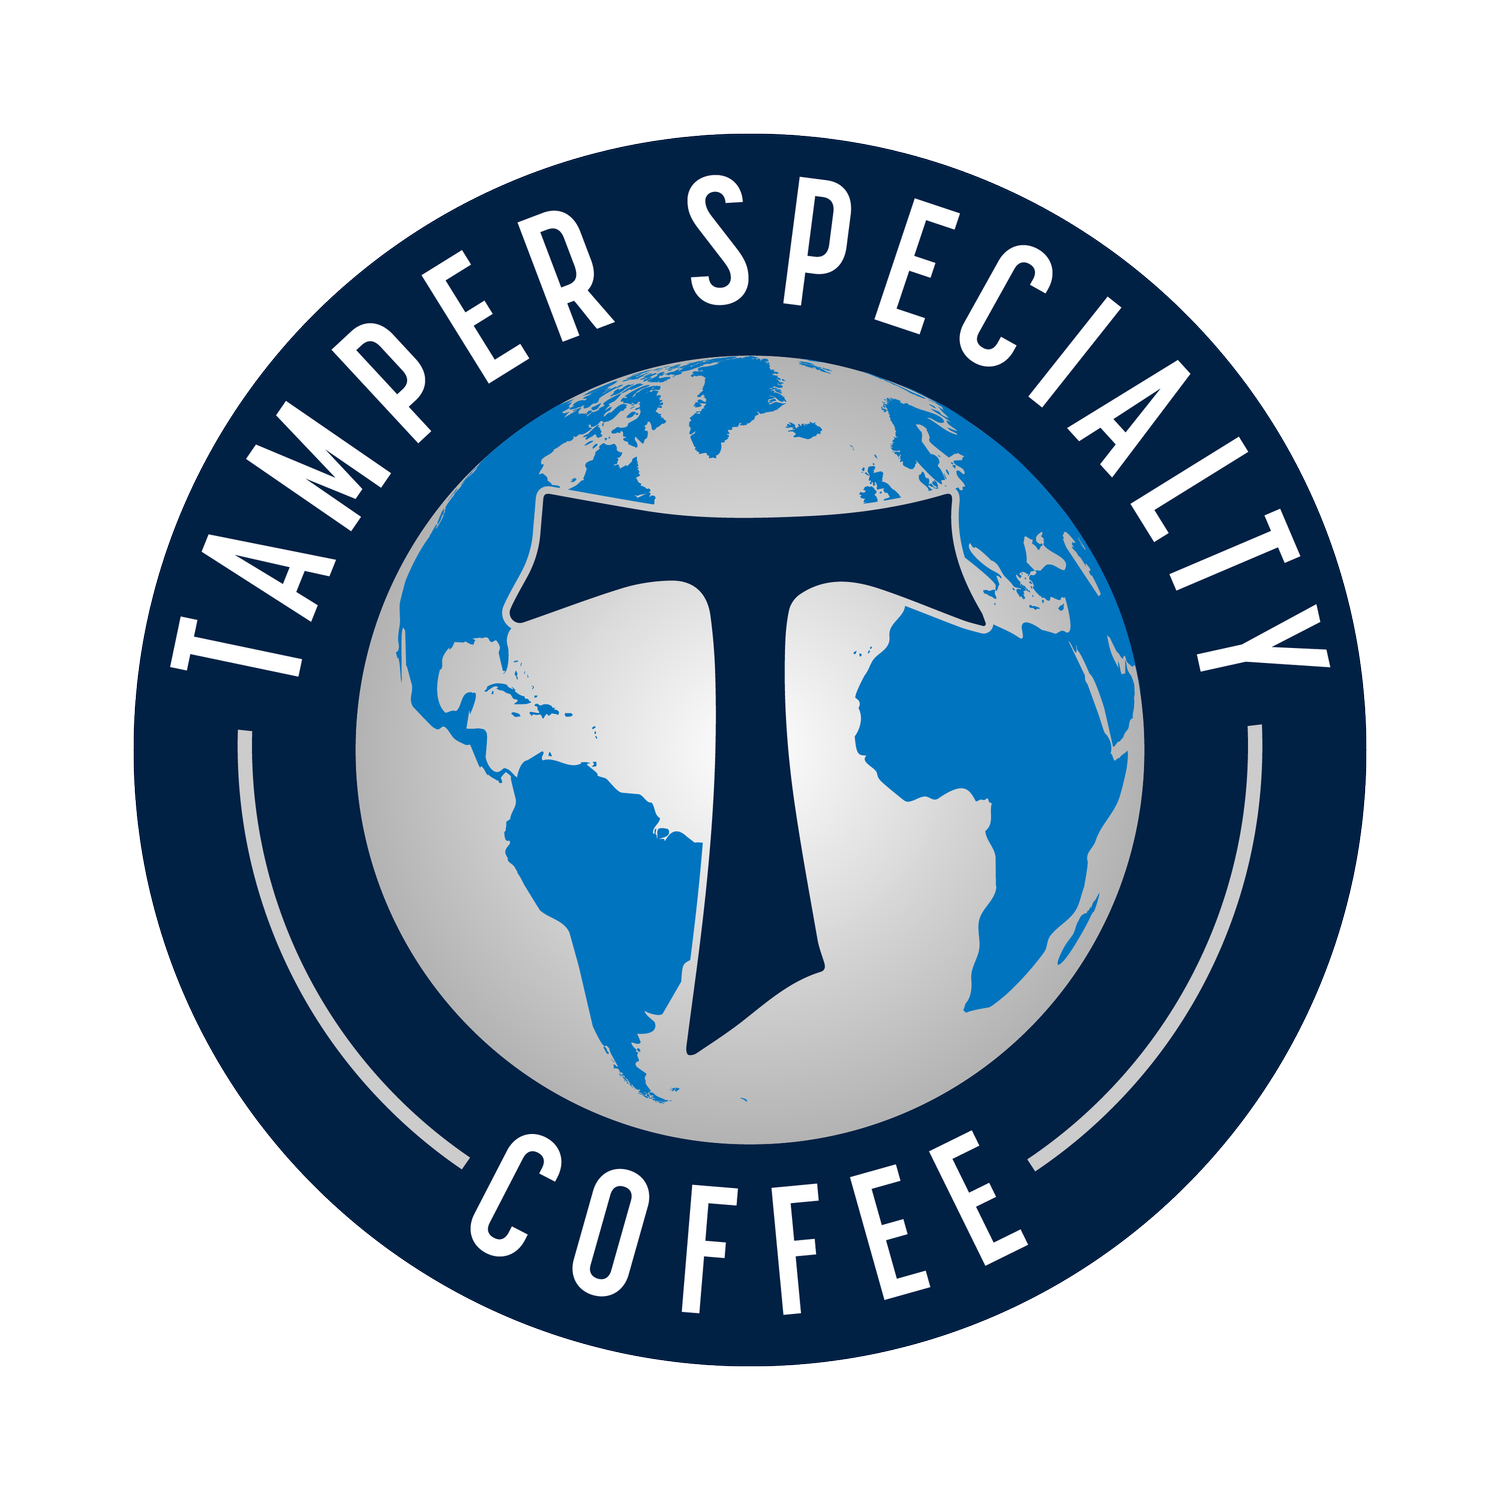 Tamper Specialty Coffee